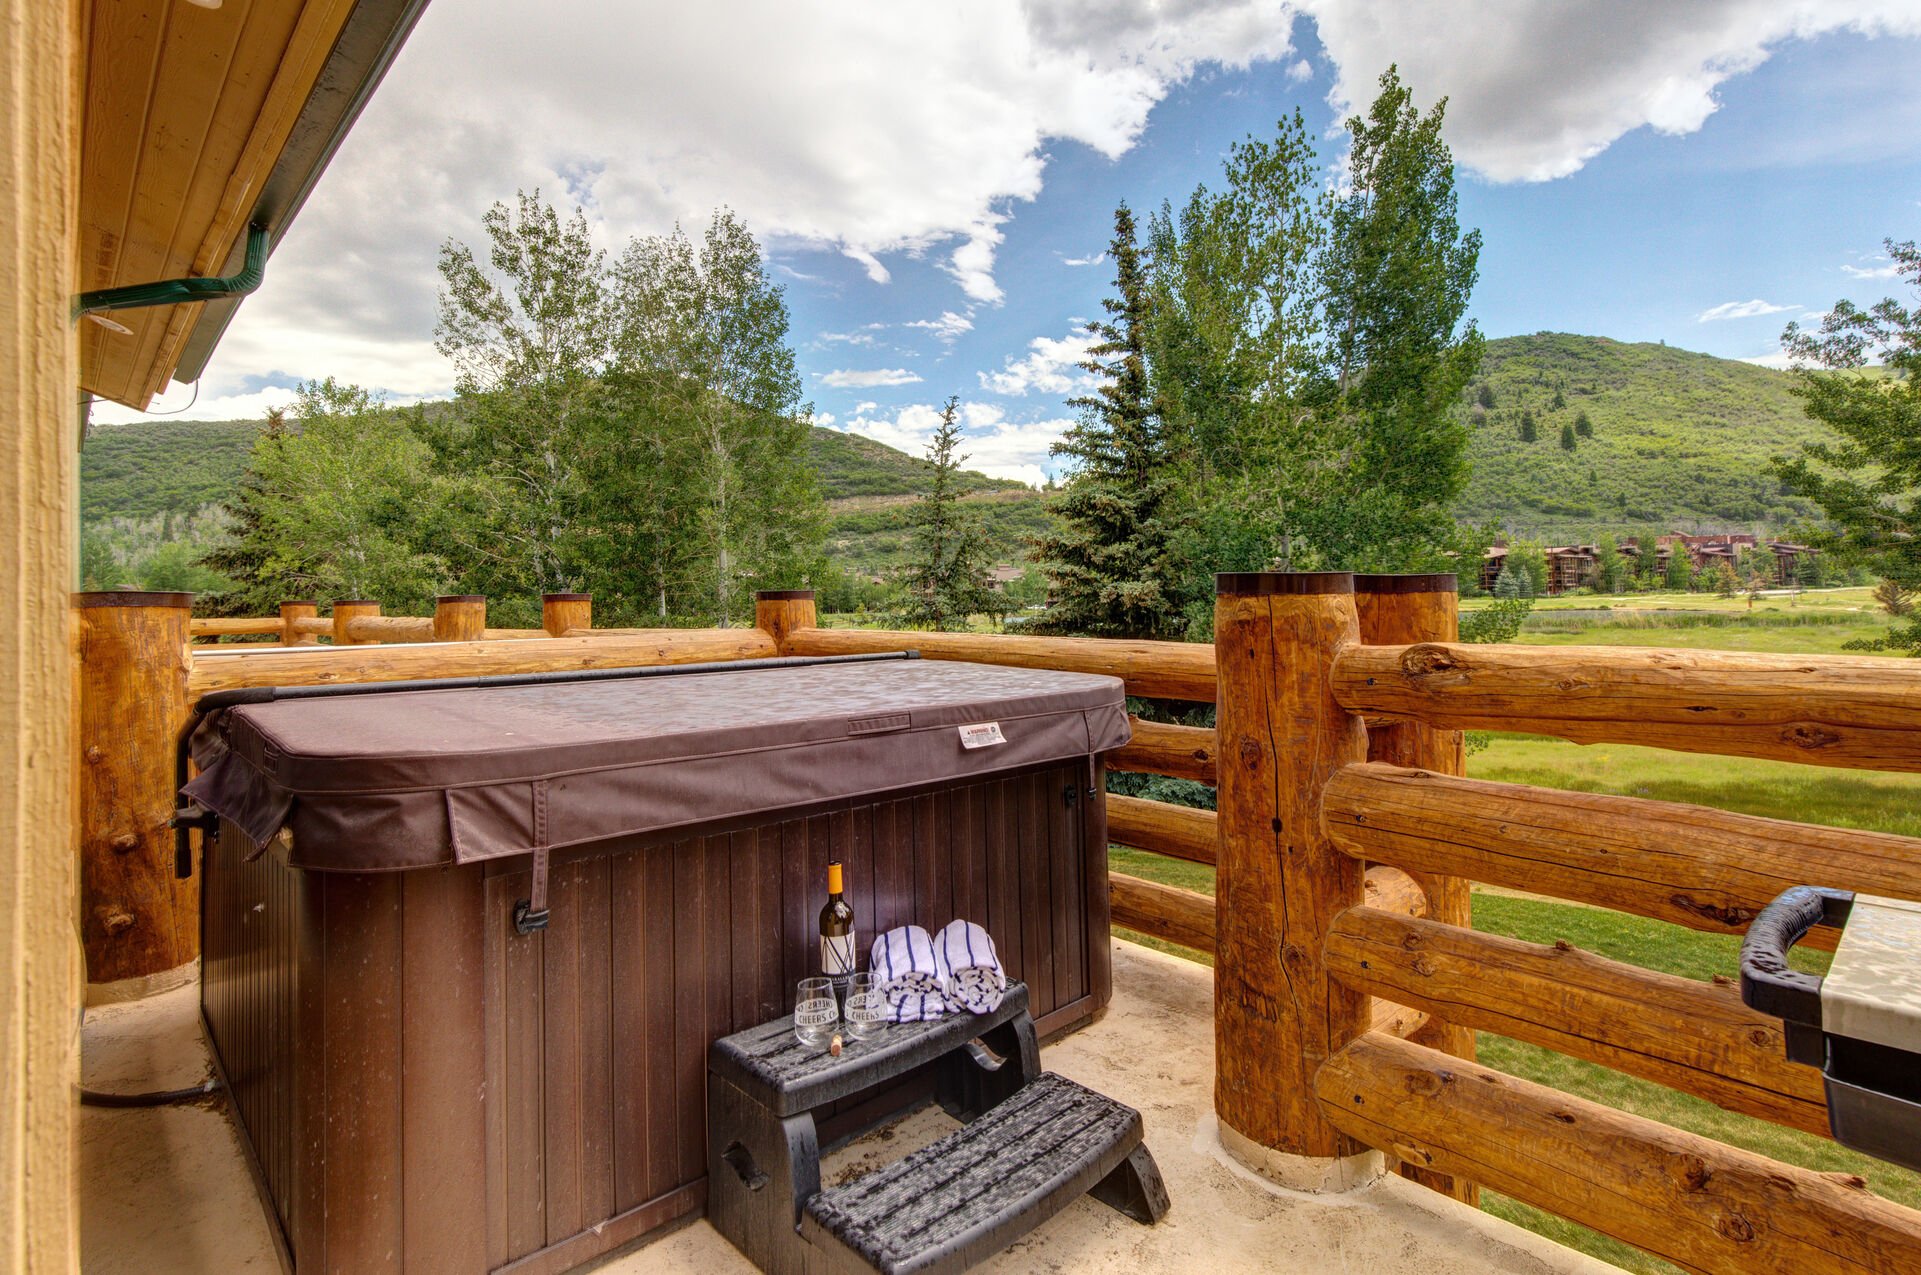 Private Hot Tub Patio overlooking Deer Valley Resort with BBQ grill and outdoor furnishings